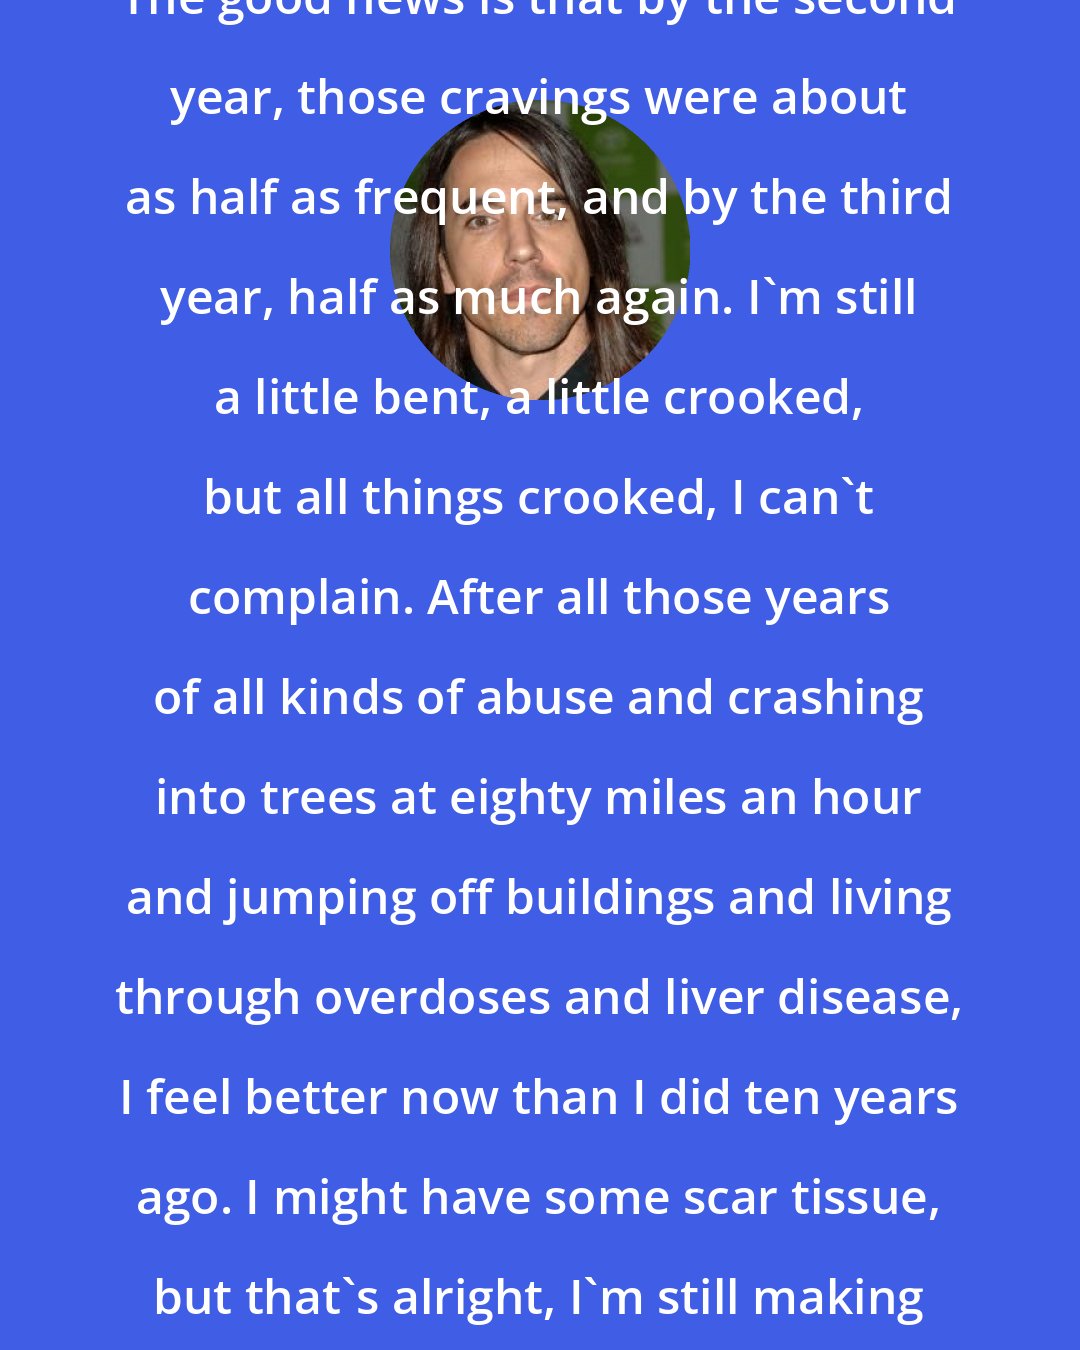 Anthony Kiedis: The good news is that by the second year, those cravings were about as half as frequent, and by the third year, half as much again. I'm still a little bent, a little crooked, but all things crooked, I can't complain. After all those years of all kinds of abuse and crashing into trees at eighty miles an hour and jumping off buildings and living through overdoses and liver disease, I feel better now than I did ten years ago. I might have some scar tissue, but that's alright, I'm still making progress.